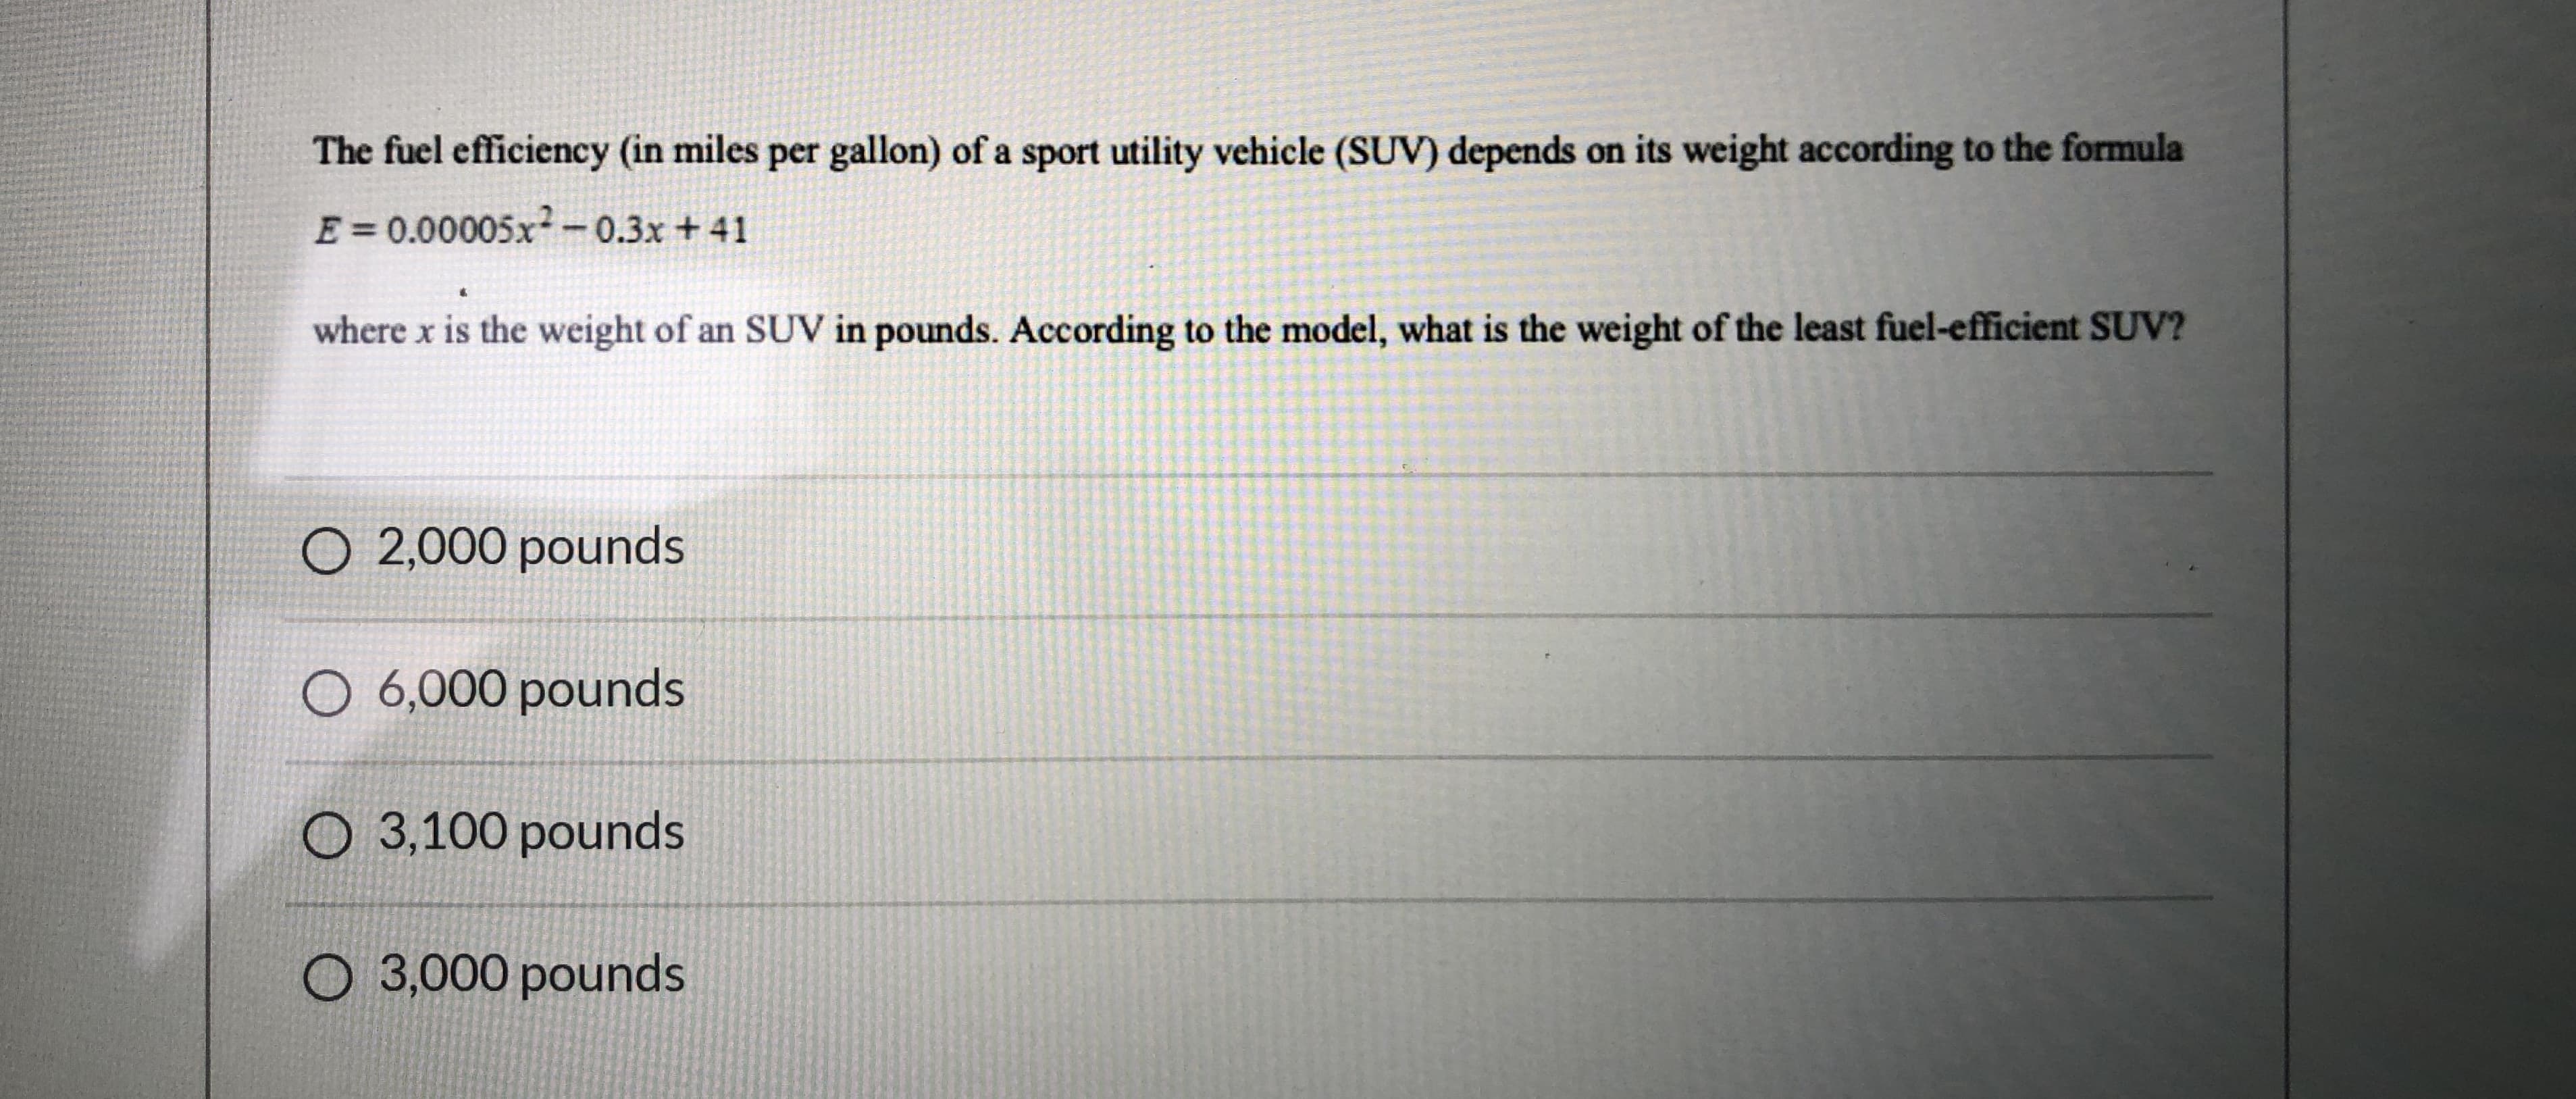 The fuel efficiency (in miles per gallon) of a sport utility vehicle (SUV) depends on its weight according to the formula
E=0.00005x-0.3x +41
where x is the weight of an SUV in pounds. According to the model, what is the weight of the least fuel-efficient SUV?
O 2,000 pounds
O 6,000 pounds
O 3,100 pounds
O 3,000 pounds
